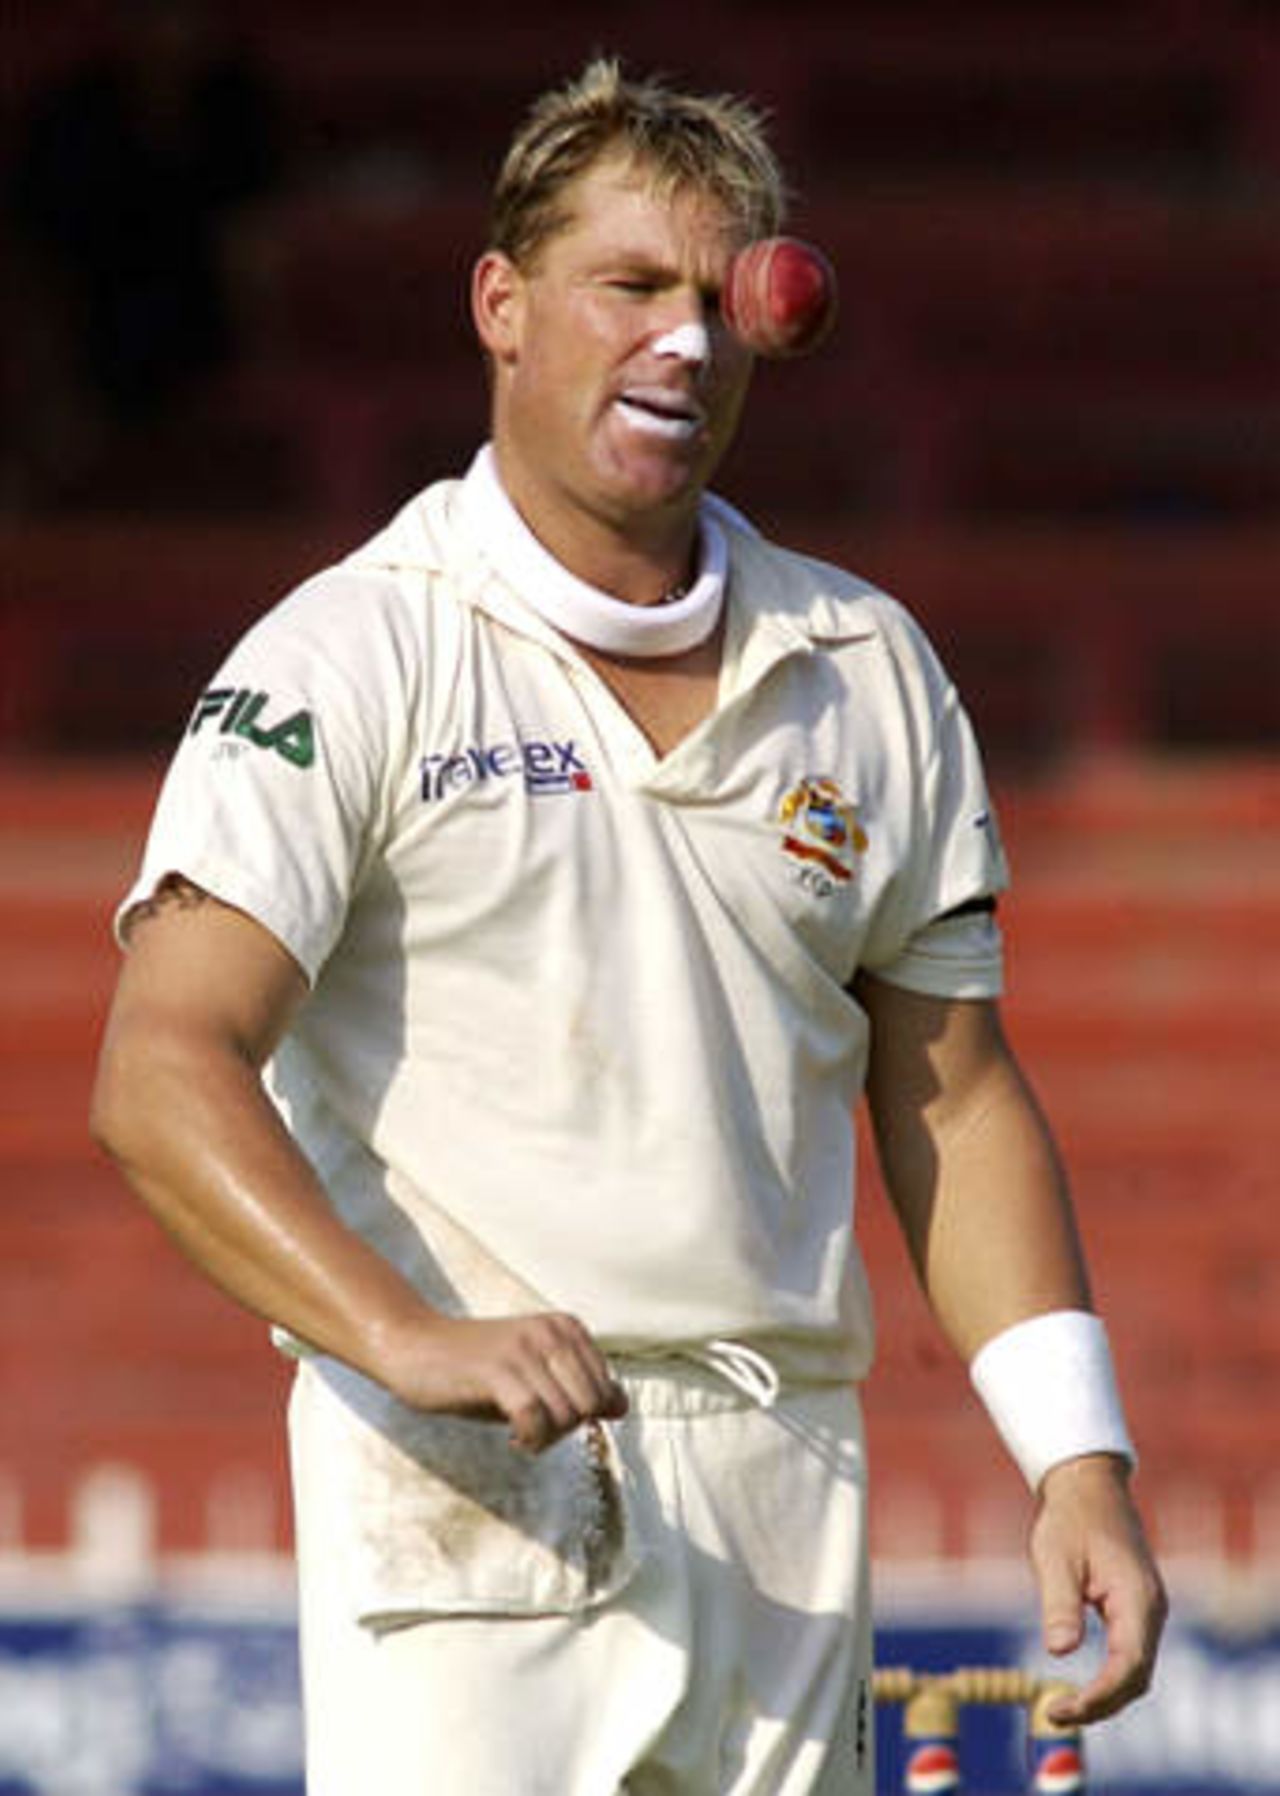 Australian spin bowler Shane Warne tosses the ball in the air before reaching his bowling run up against Pakistan on the second day of the third Test in Sharjah Cricket Stadium October 20, 2002.